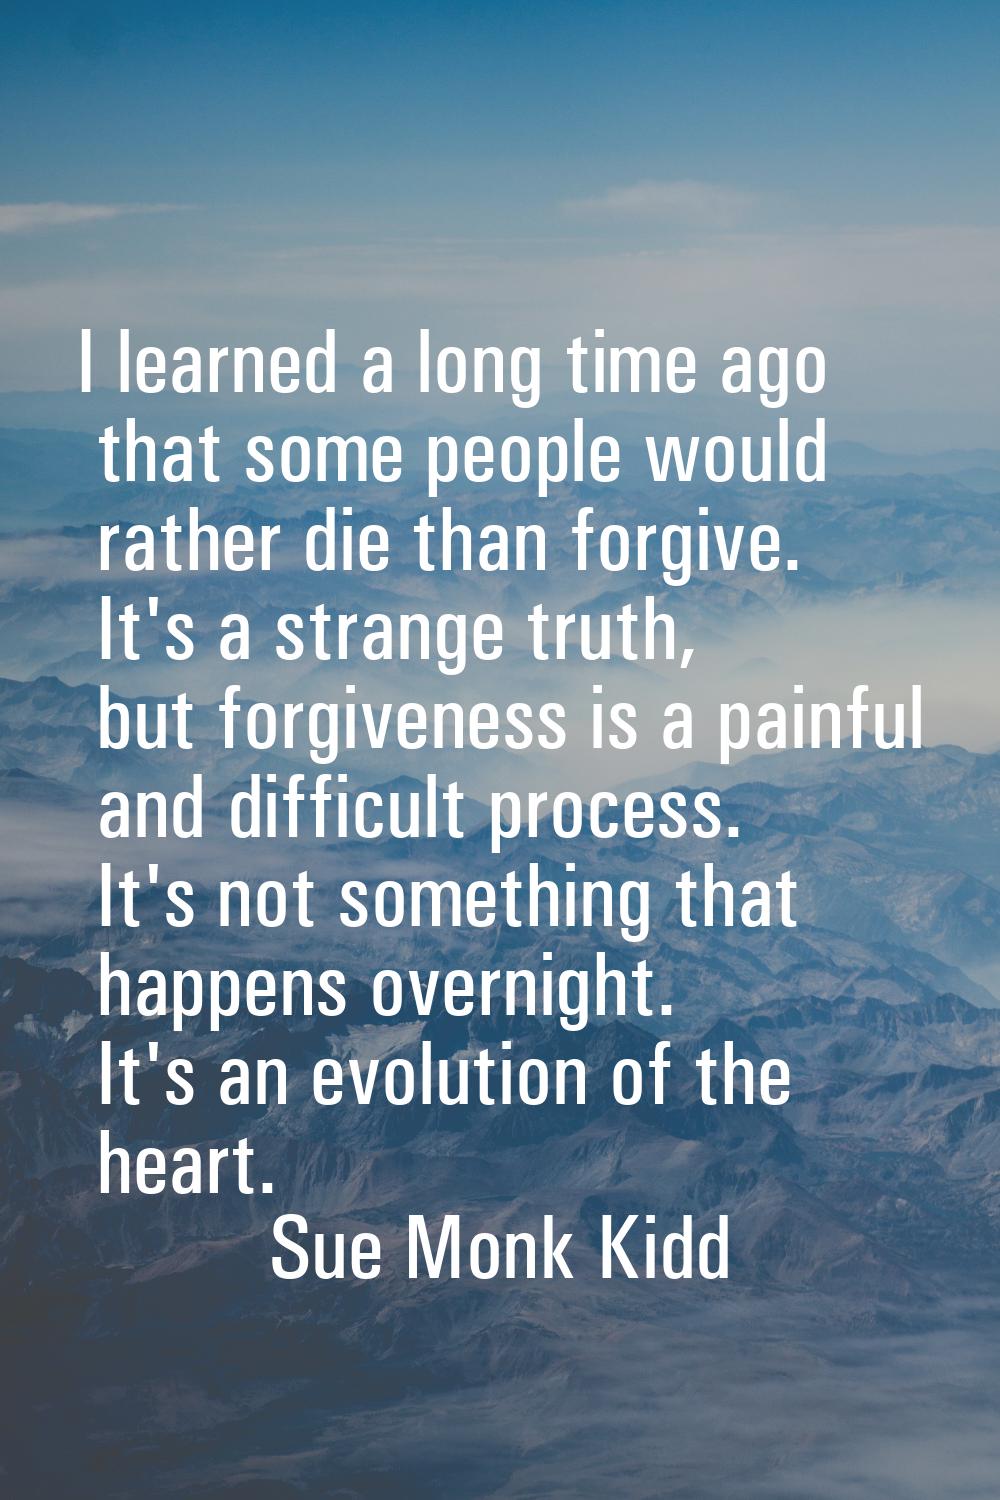 I learned a long time ago that some people would rather die than forgive. It's a strange truth, but